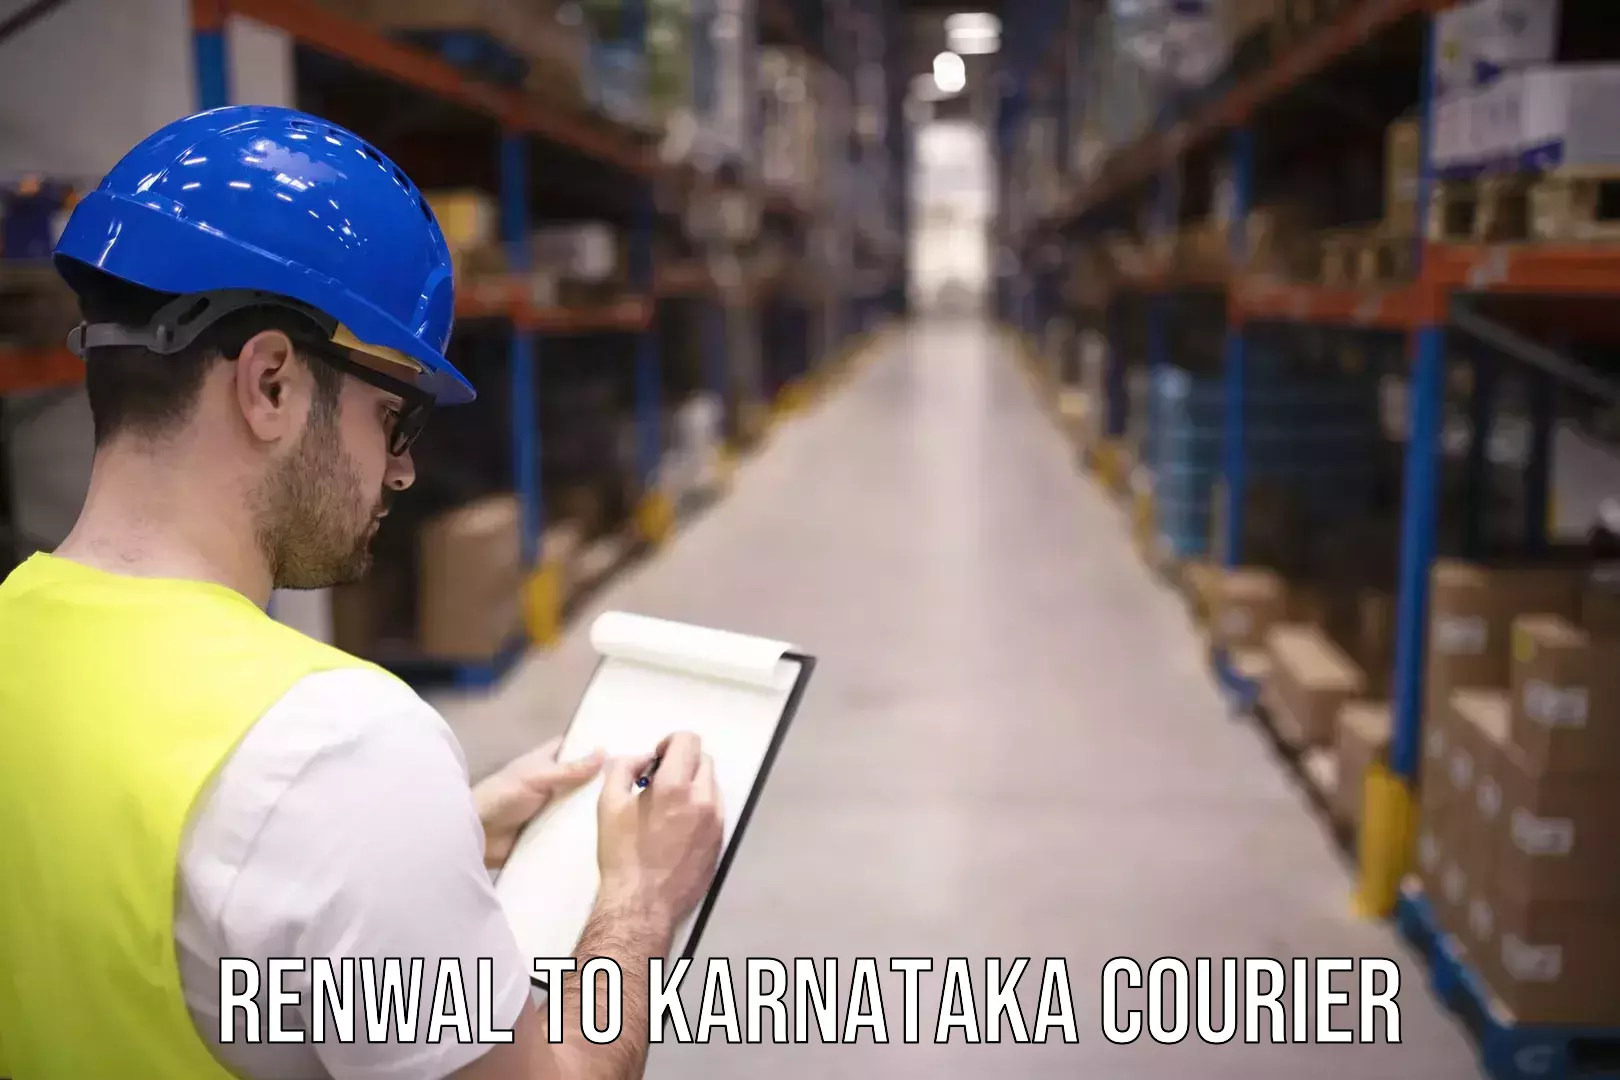 Tailored delivery services Renwal to Karnataka